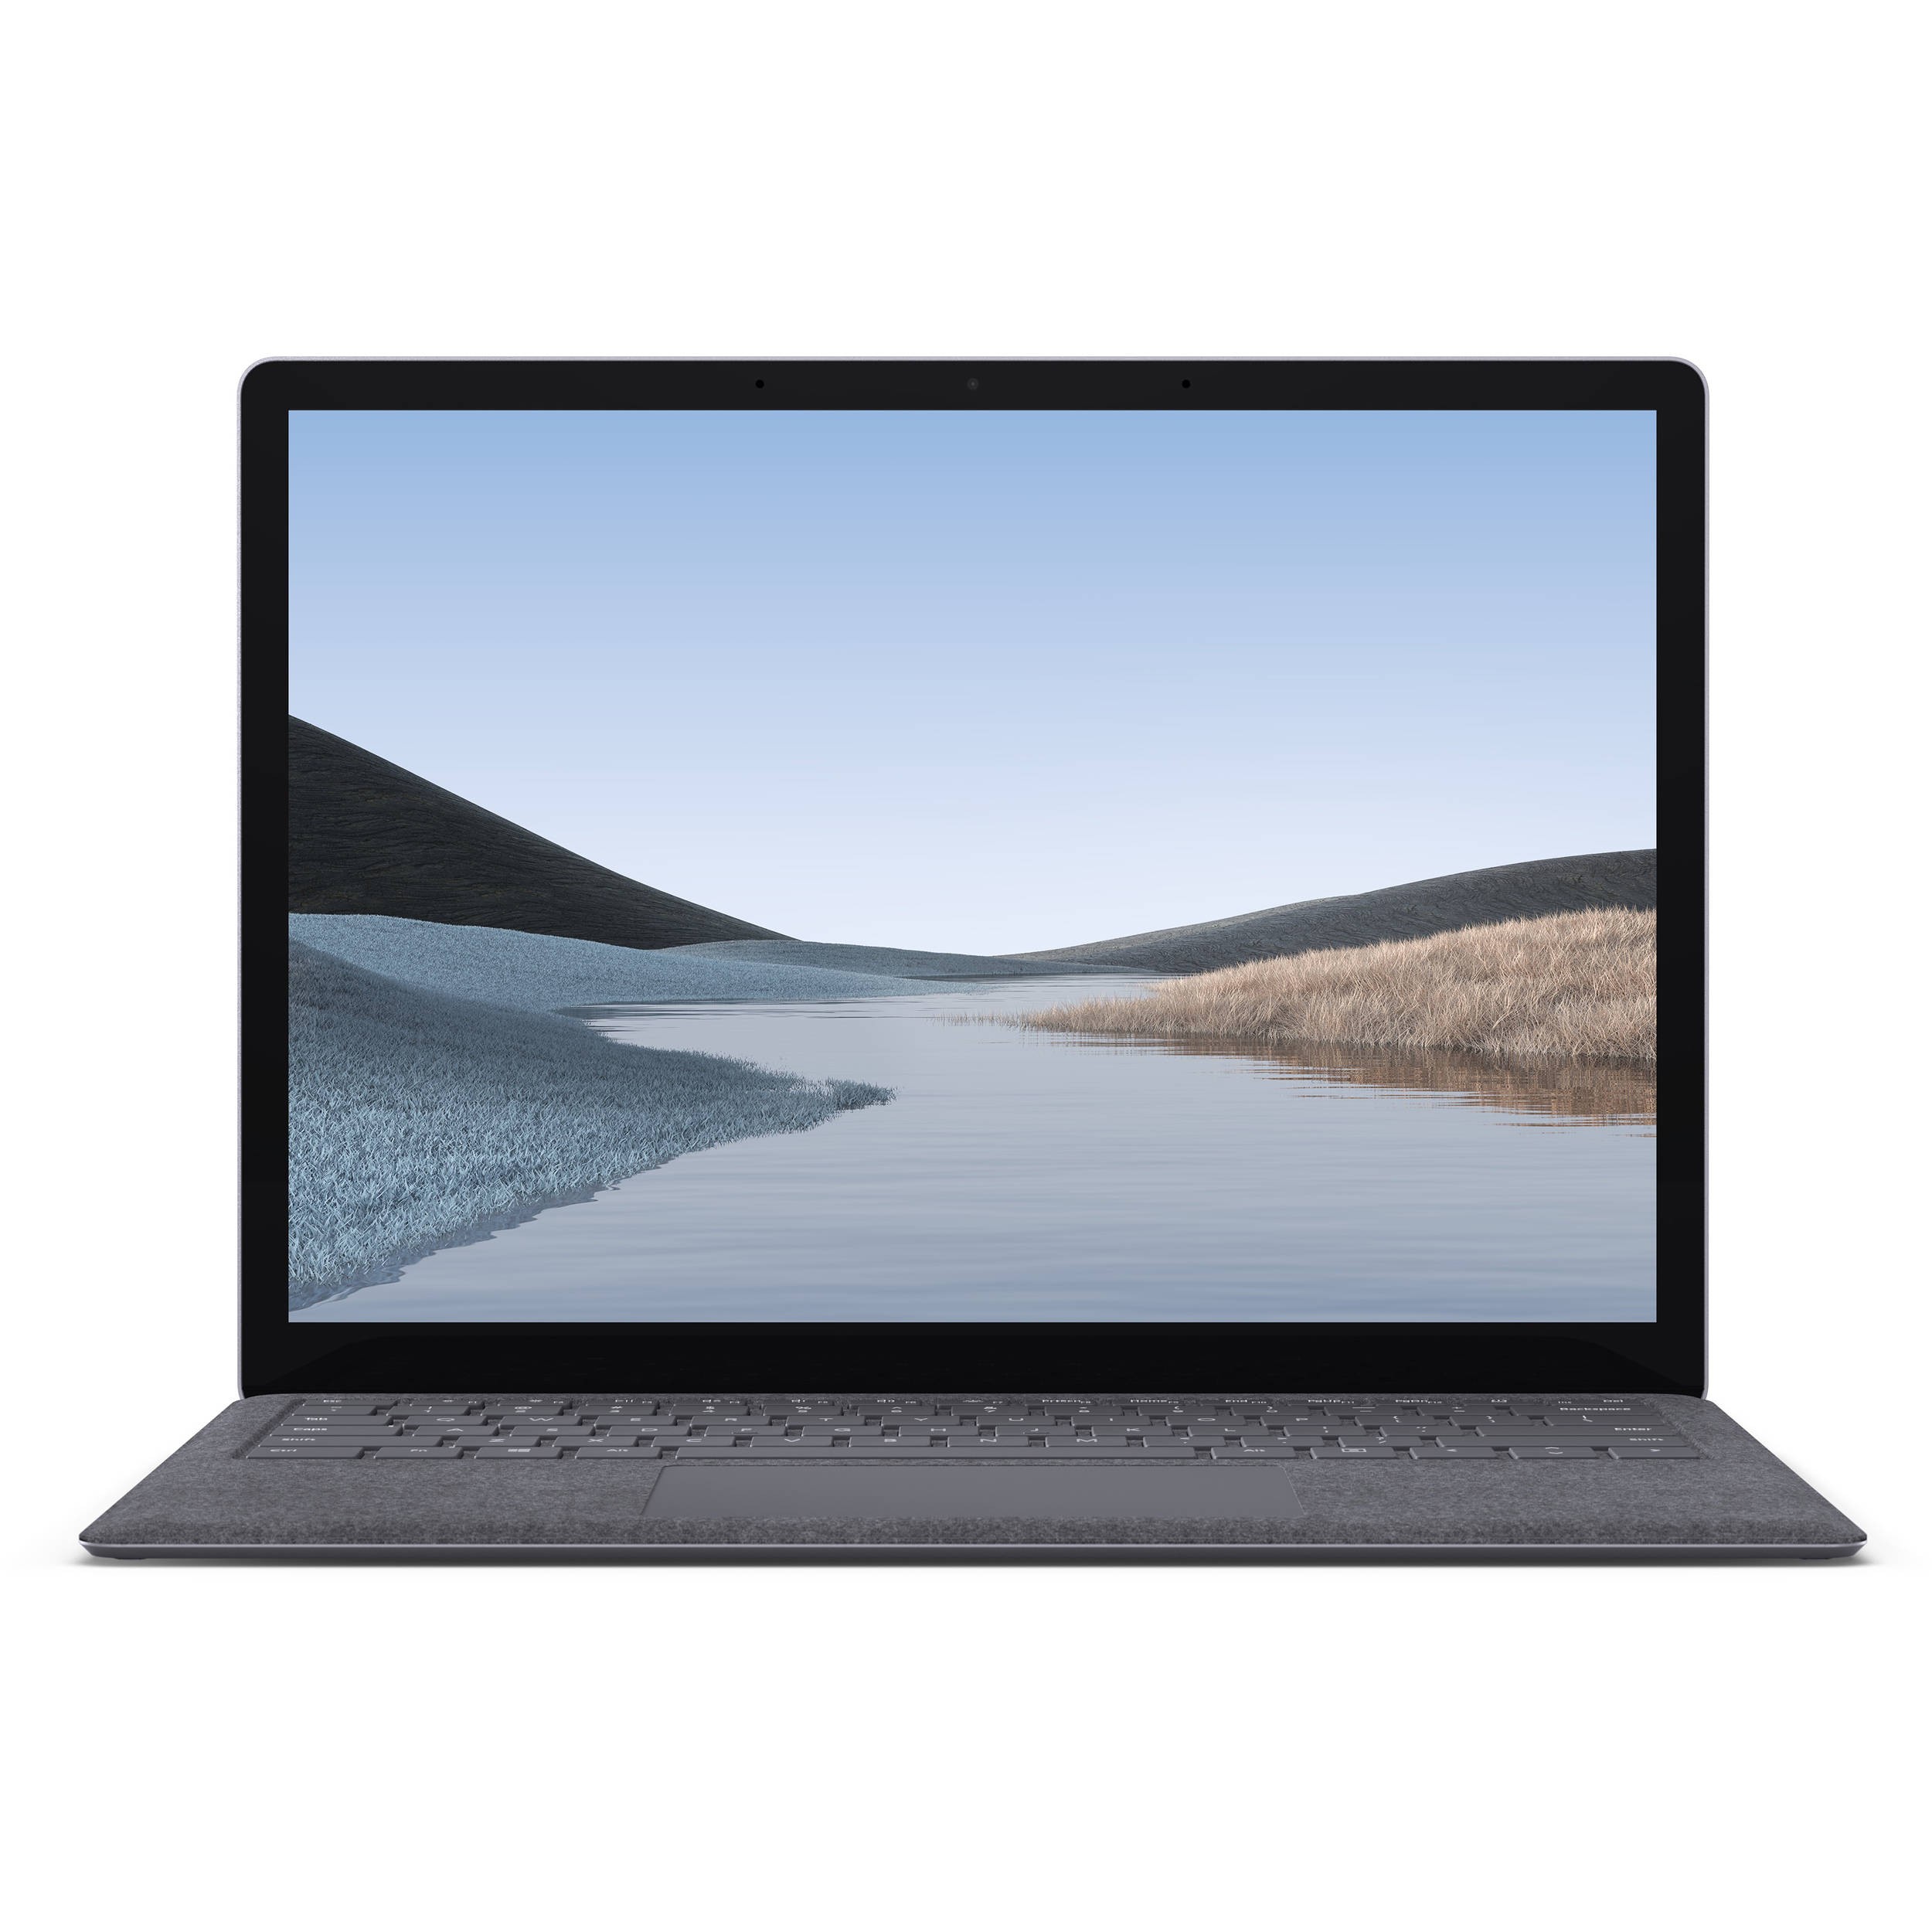 Microsoft Surface Laptop 3 1867 13.5" Touch i5-1035G7 1.2GH 8GB 128GB W10 Silver